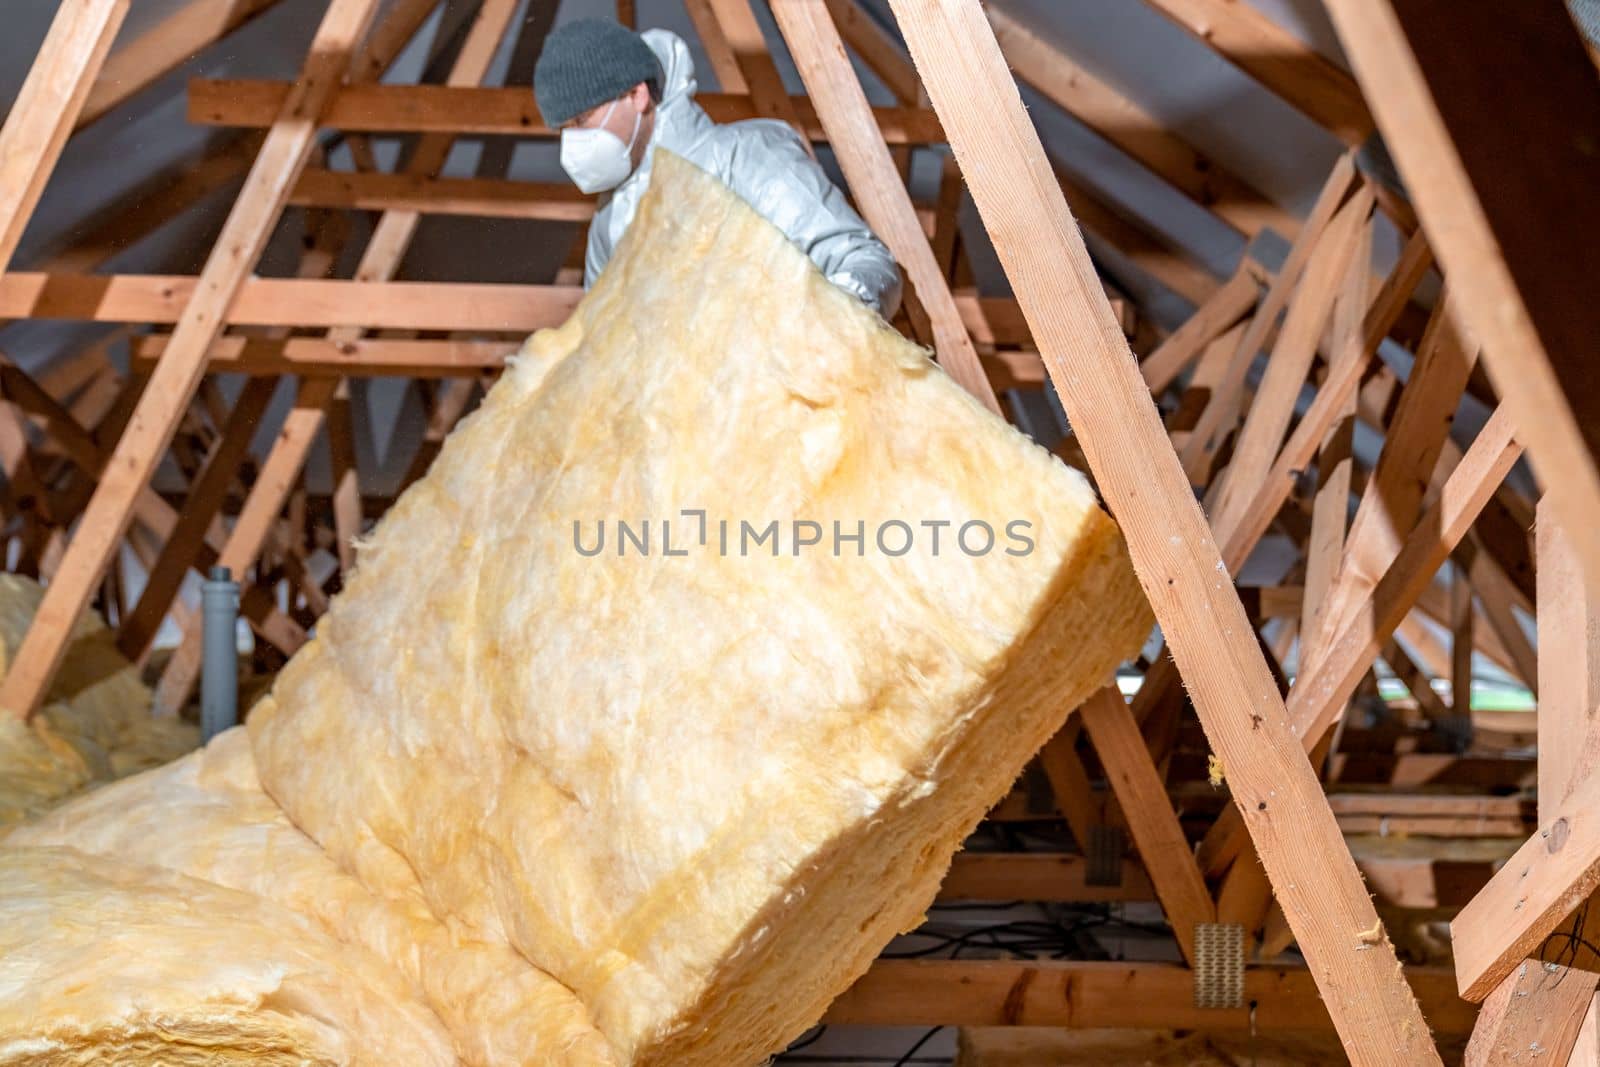 insulation of the roof and ceiling with glass wool.